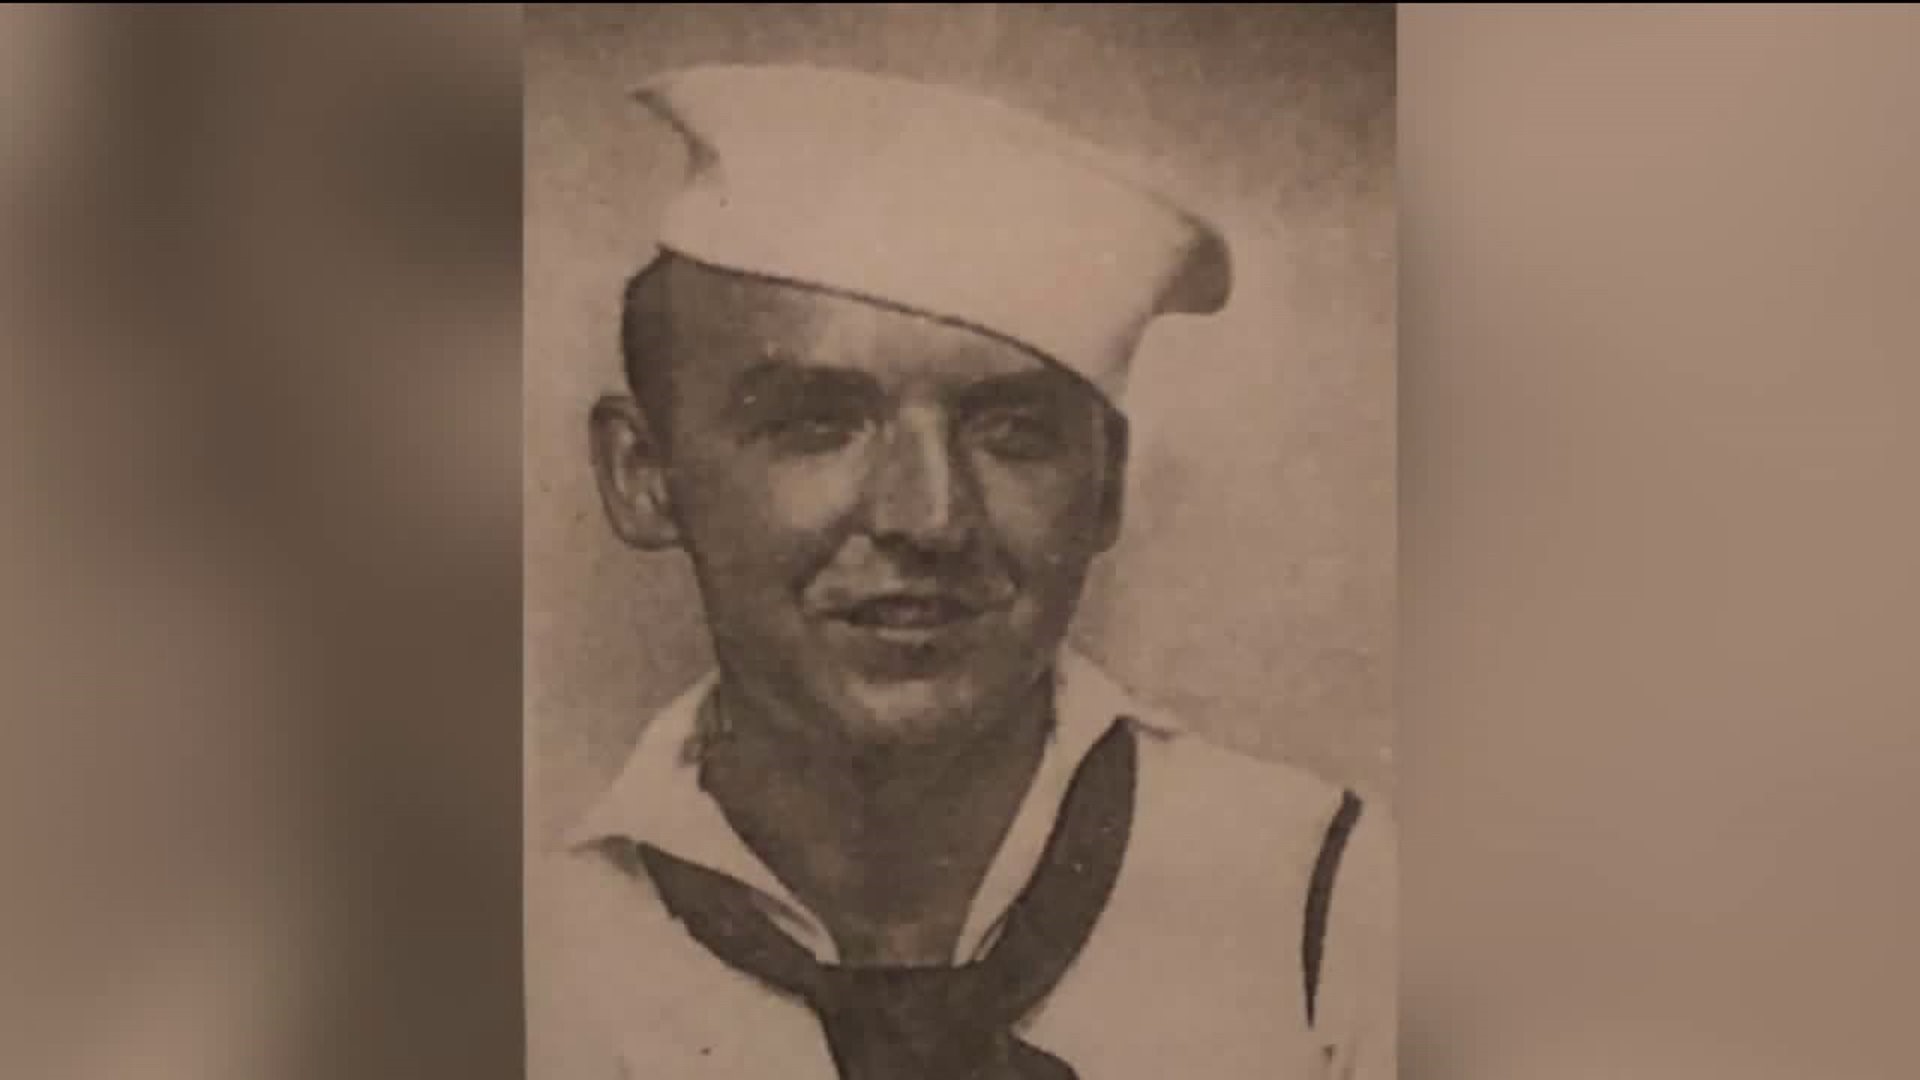 Pearl Harbor Veteran`s Remains Identified and Brought Home 77 Years Later